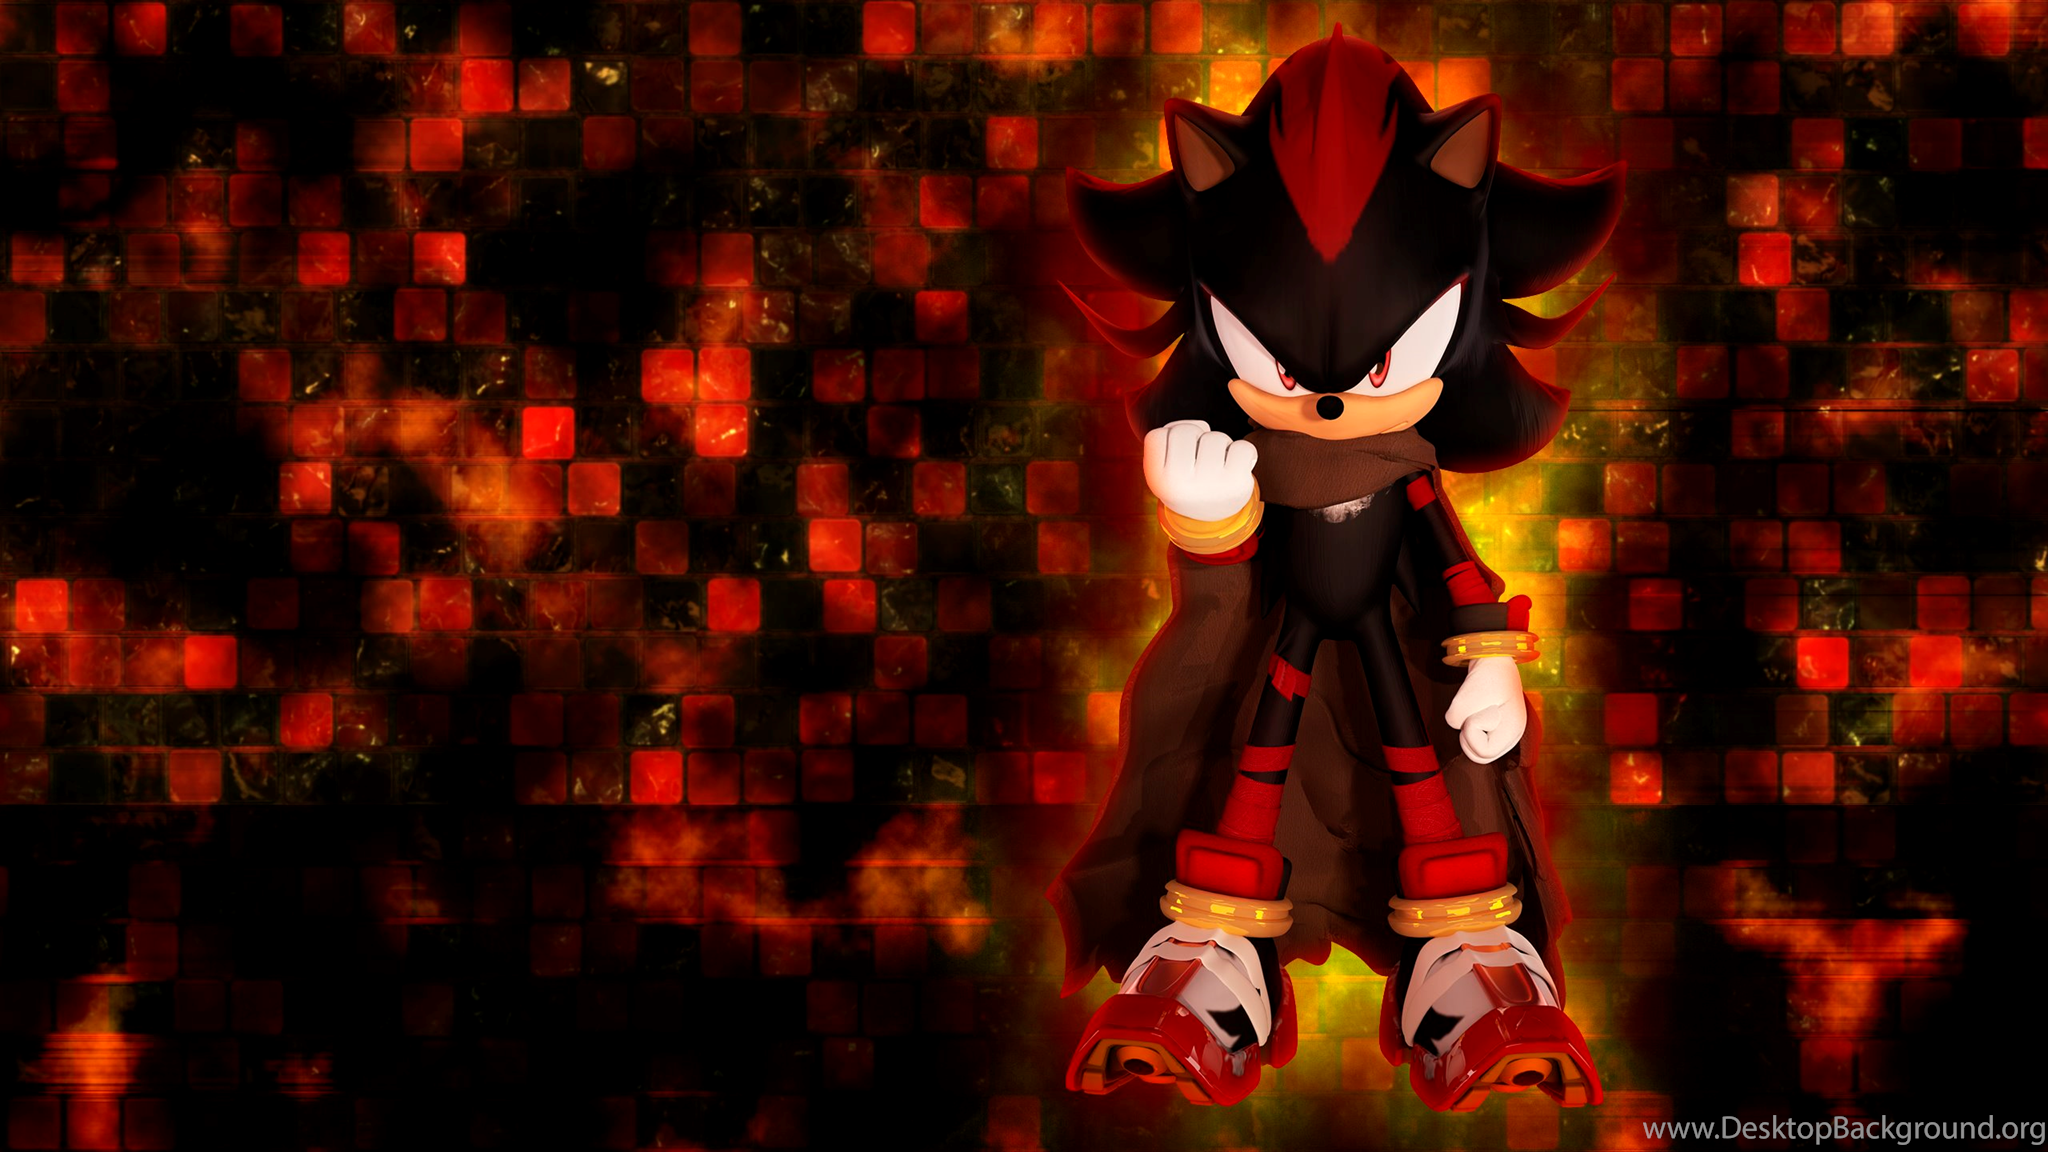 Shadow The Hedgehog From Sonic Boom In 4K By Malcom Lasiurus On. Desktop Background